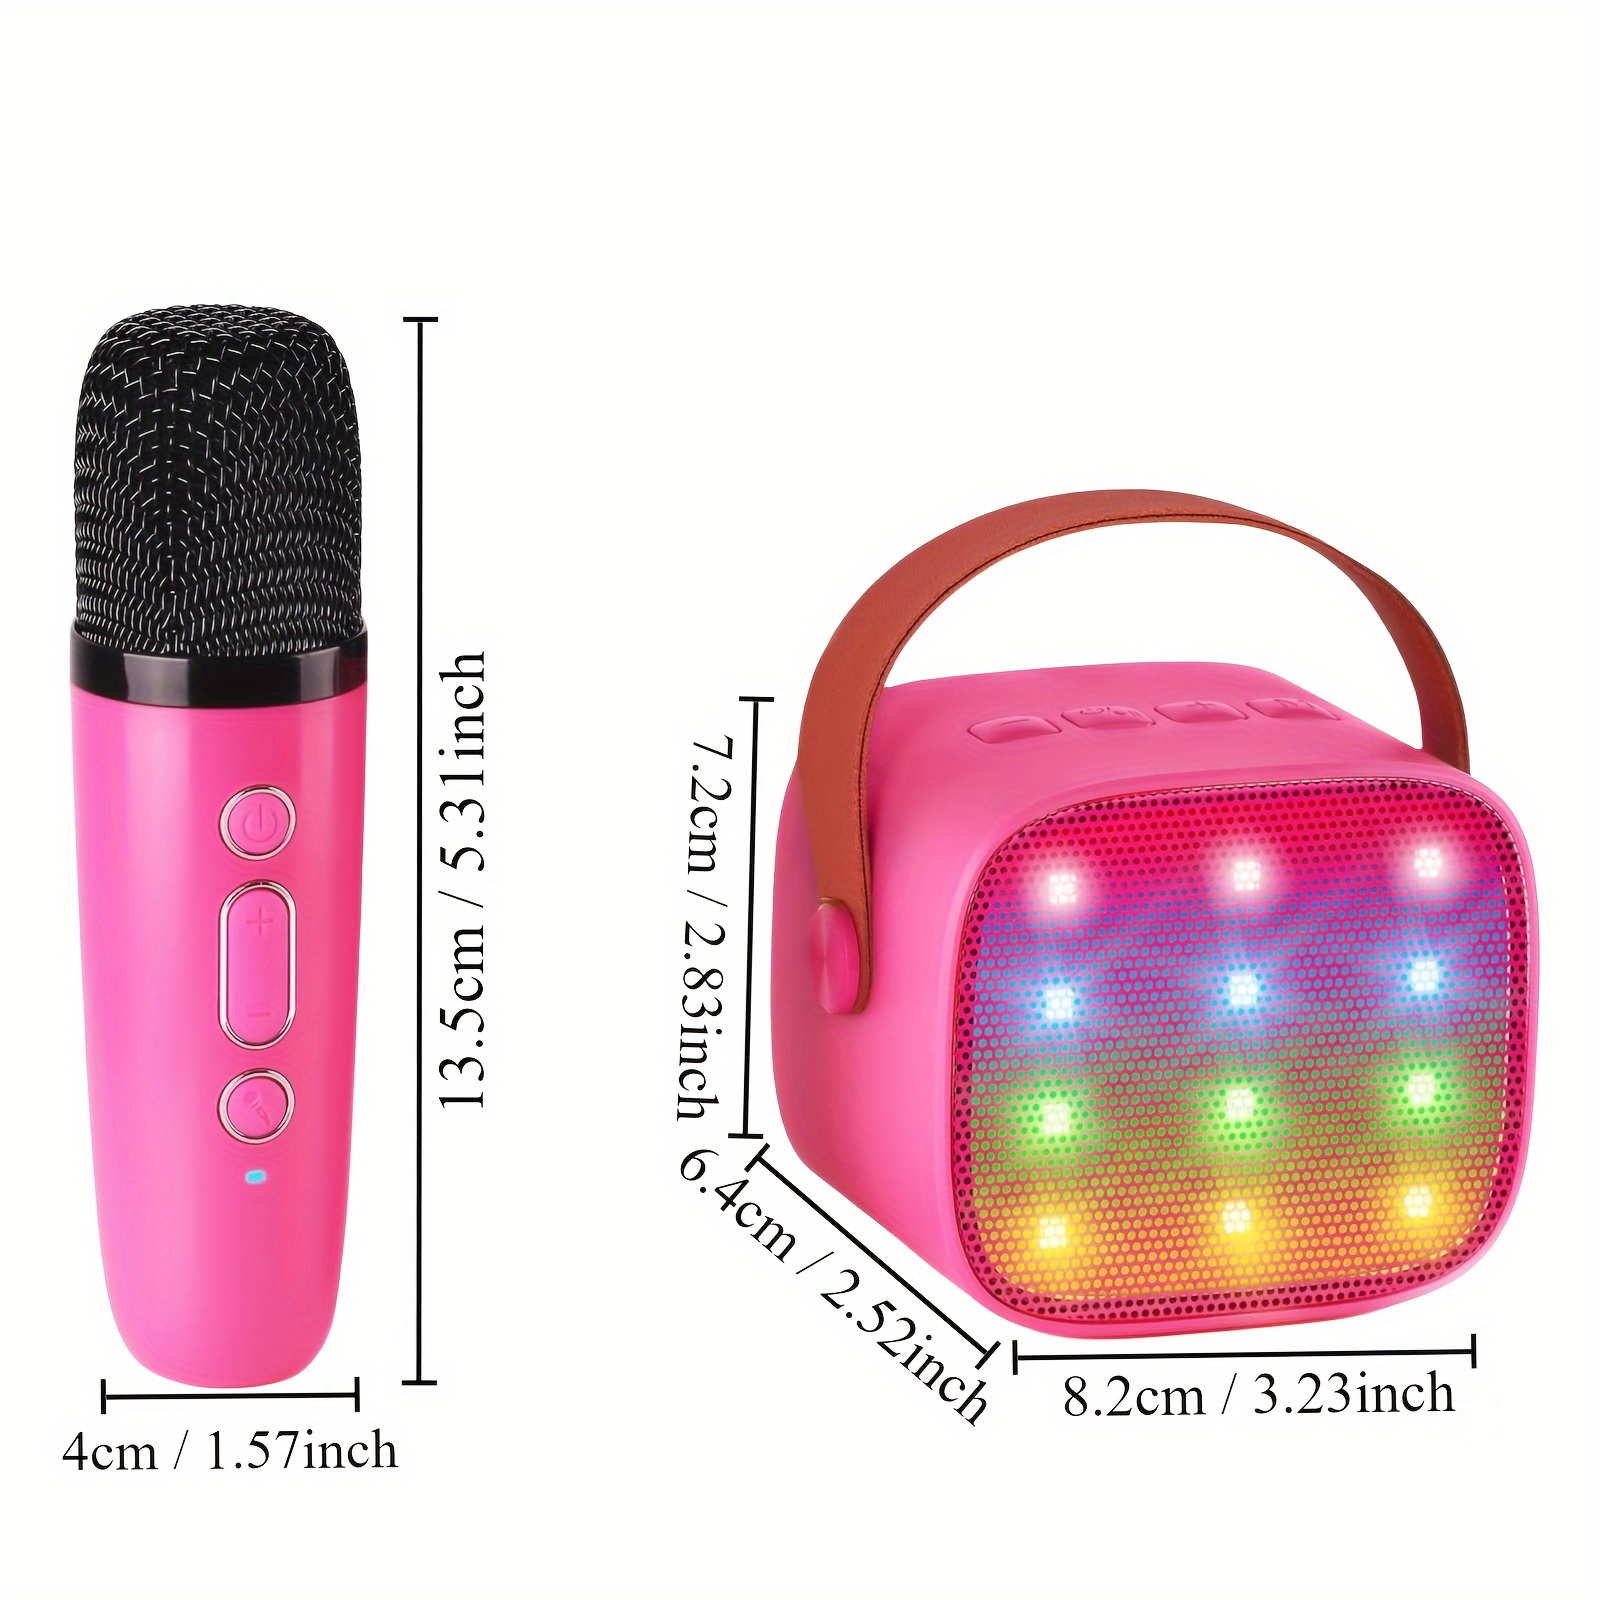 Kids Karaoke Machine for Girls Boys with Microphone Bluetooth Children  Karaoke Speaker for Singing Portable Toddler Sing Along Toy for Party  Birthday